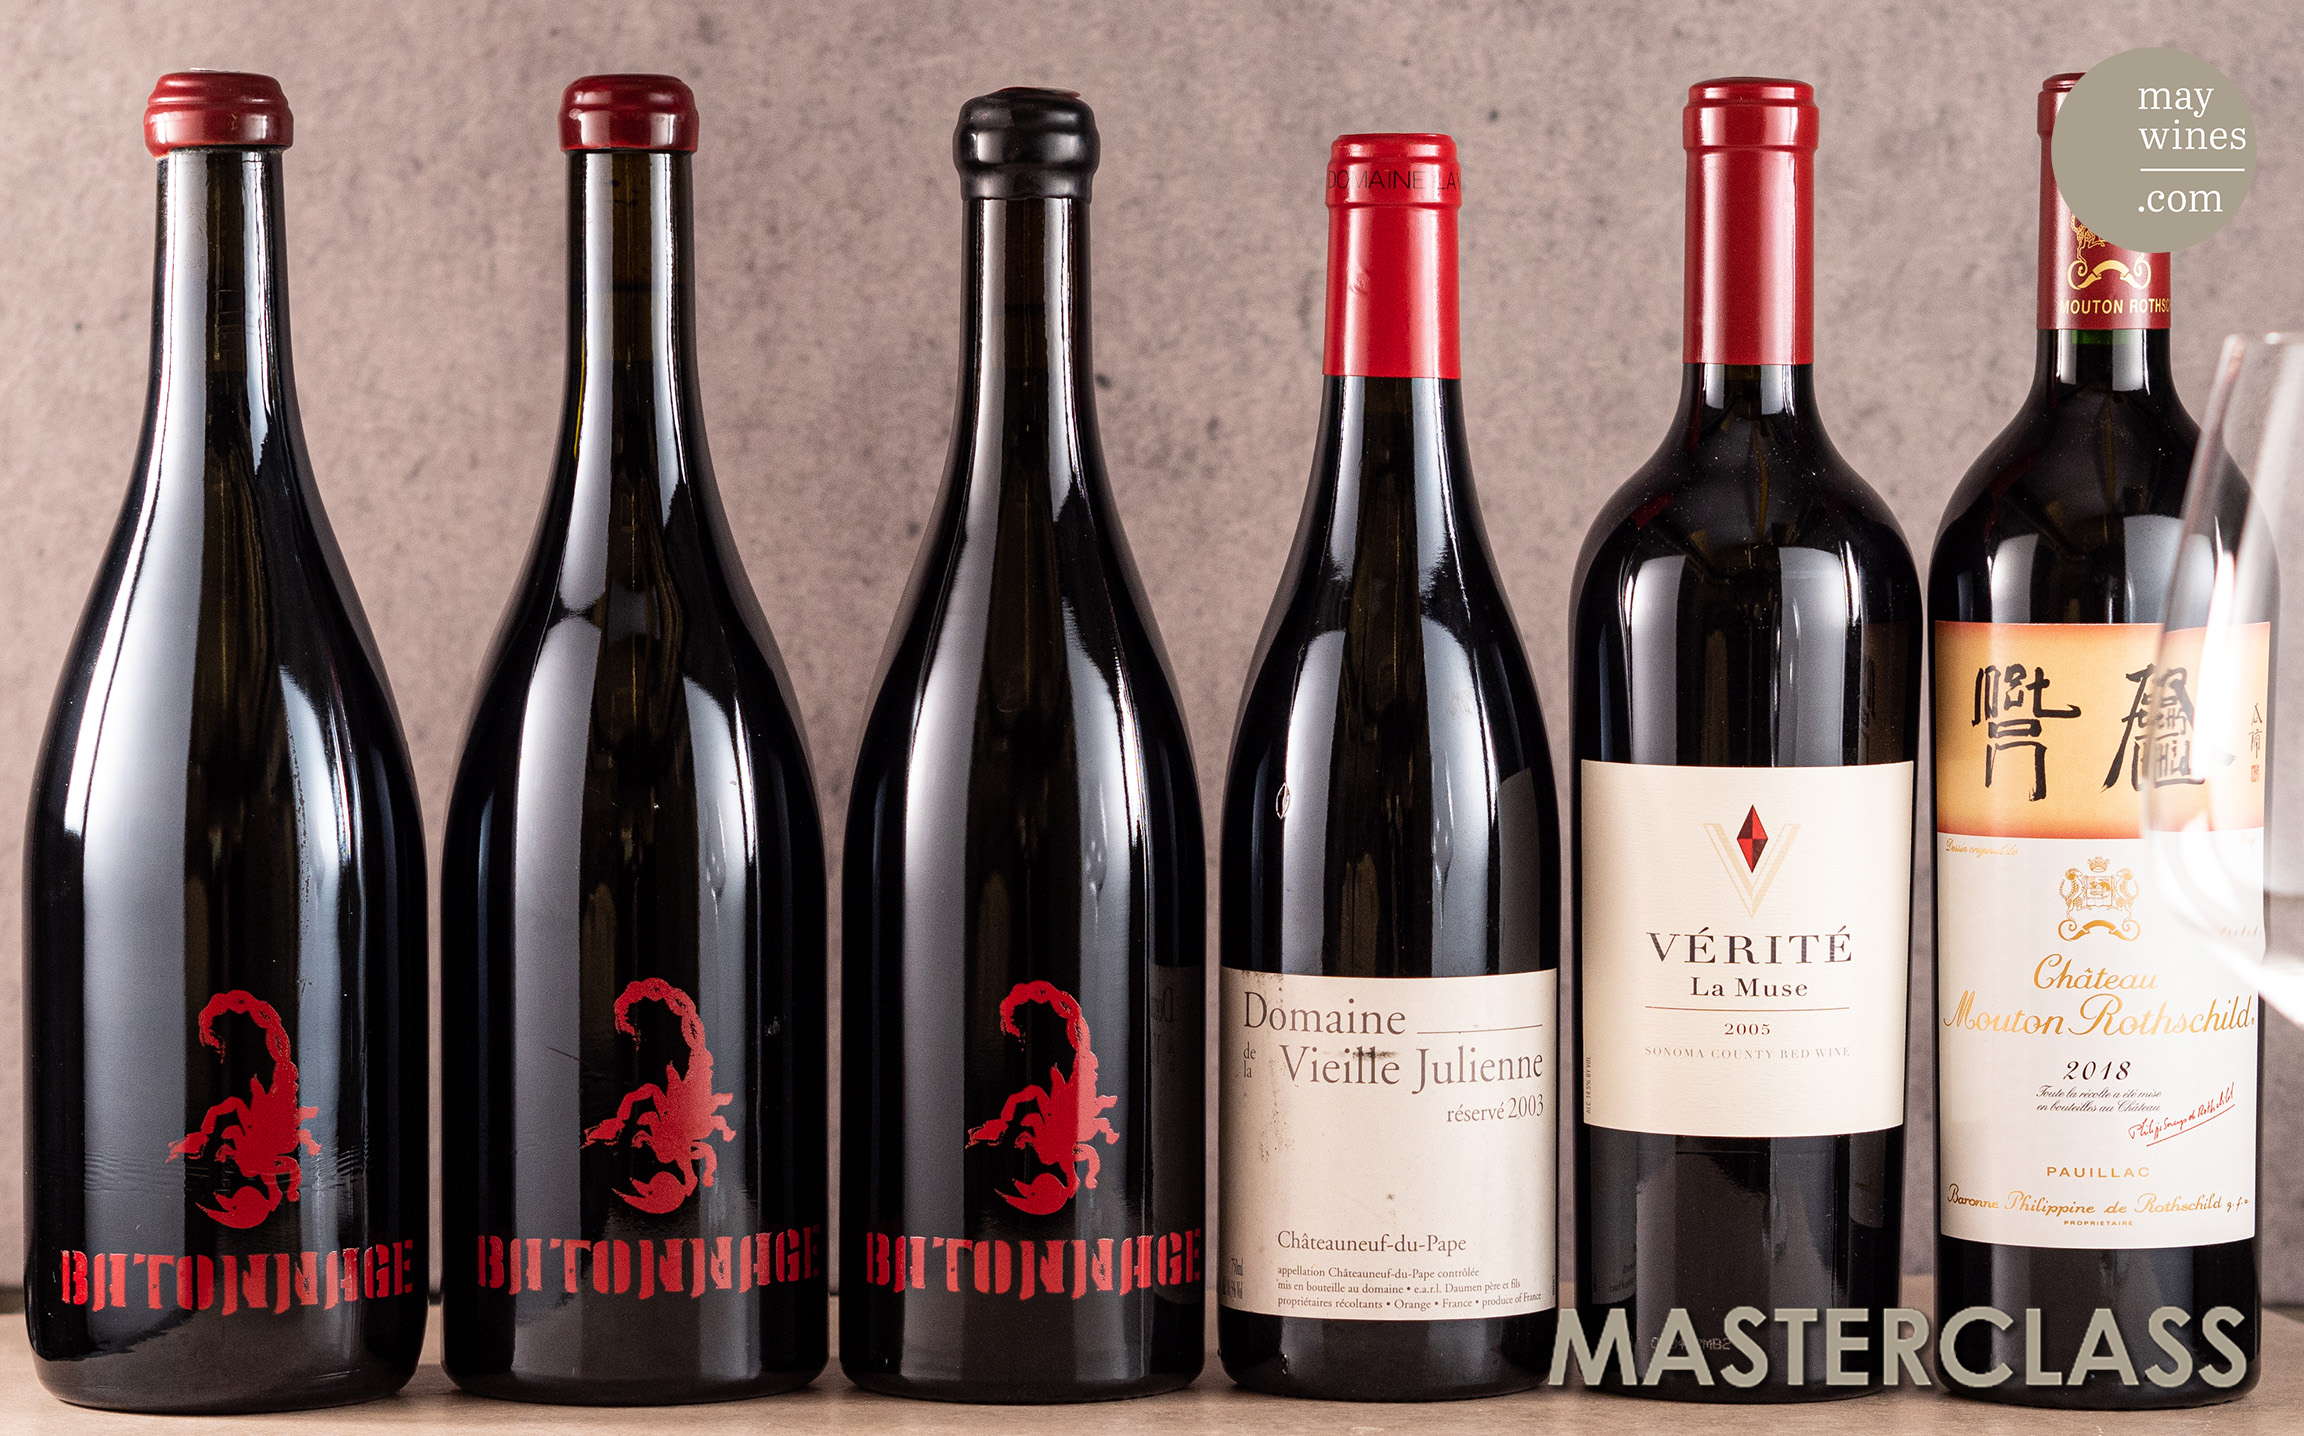 News - wines Wines - May exclusive